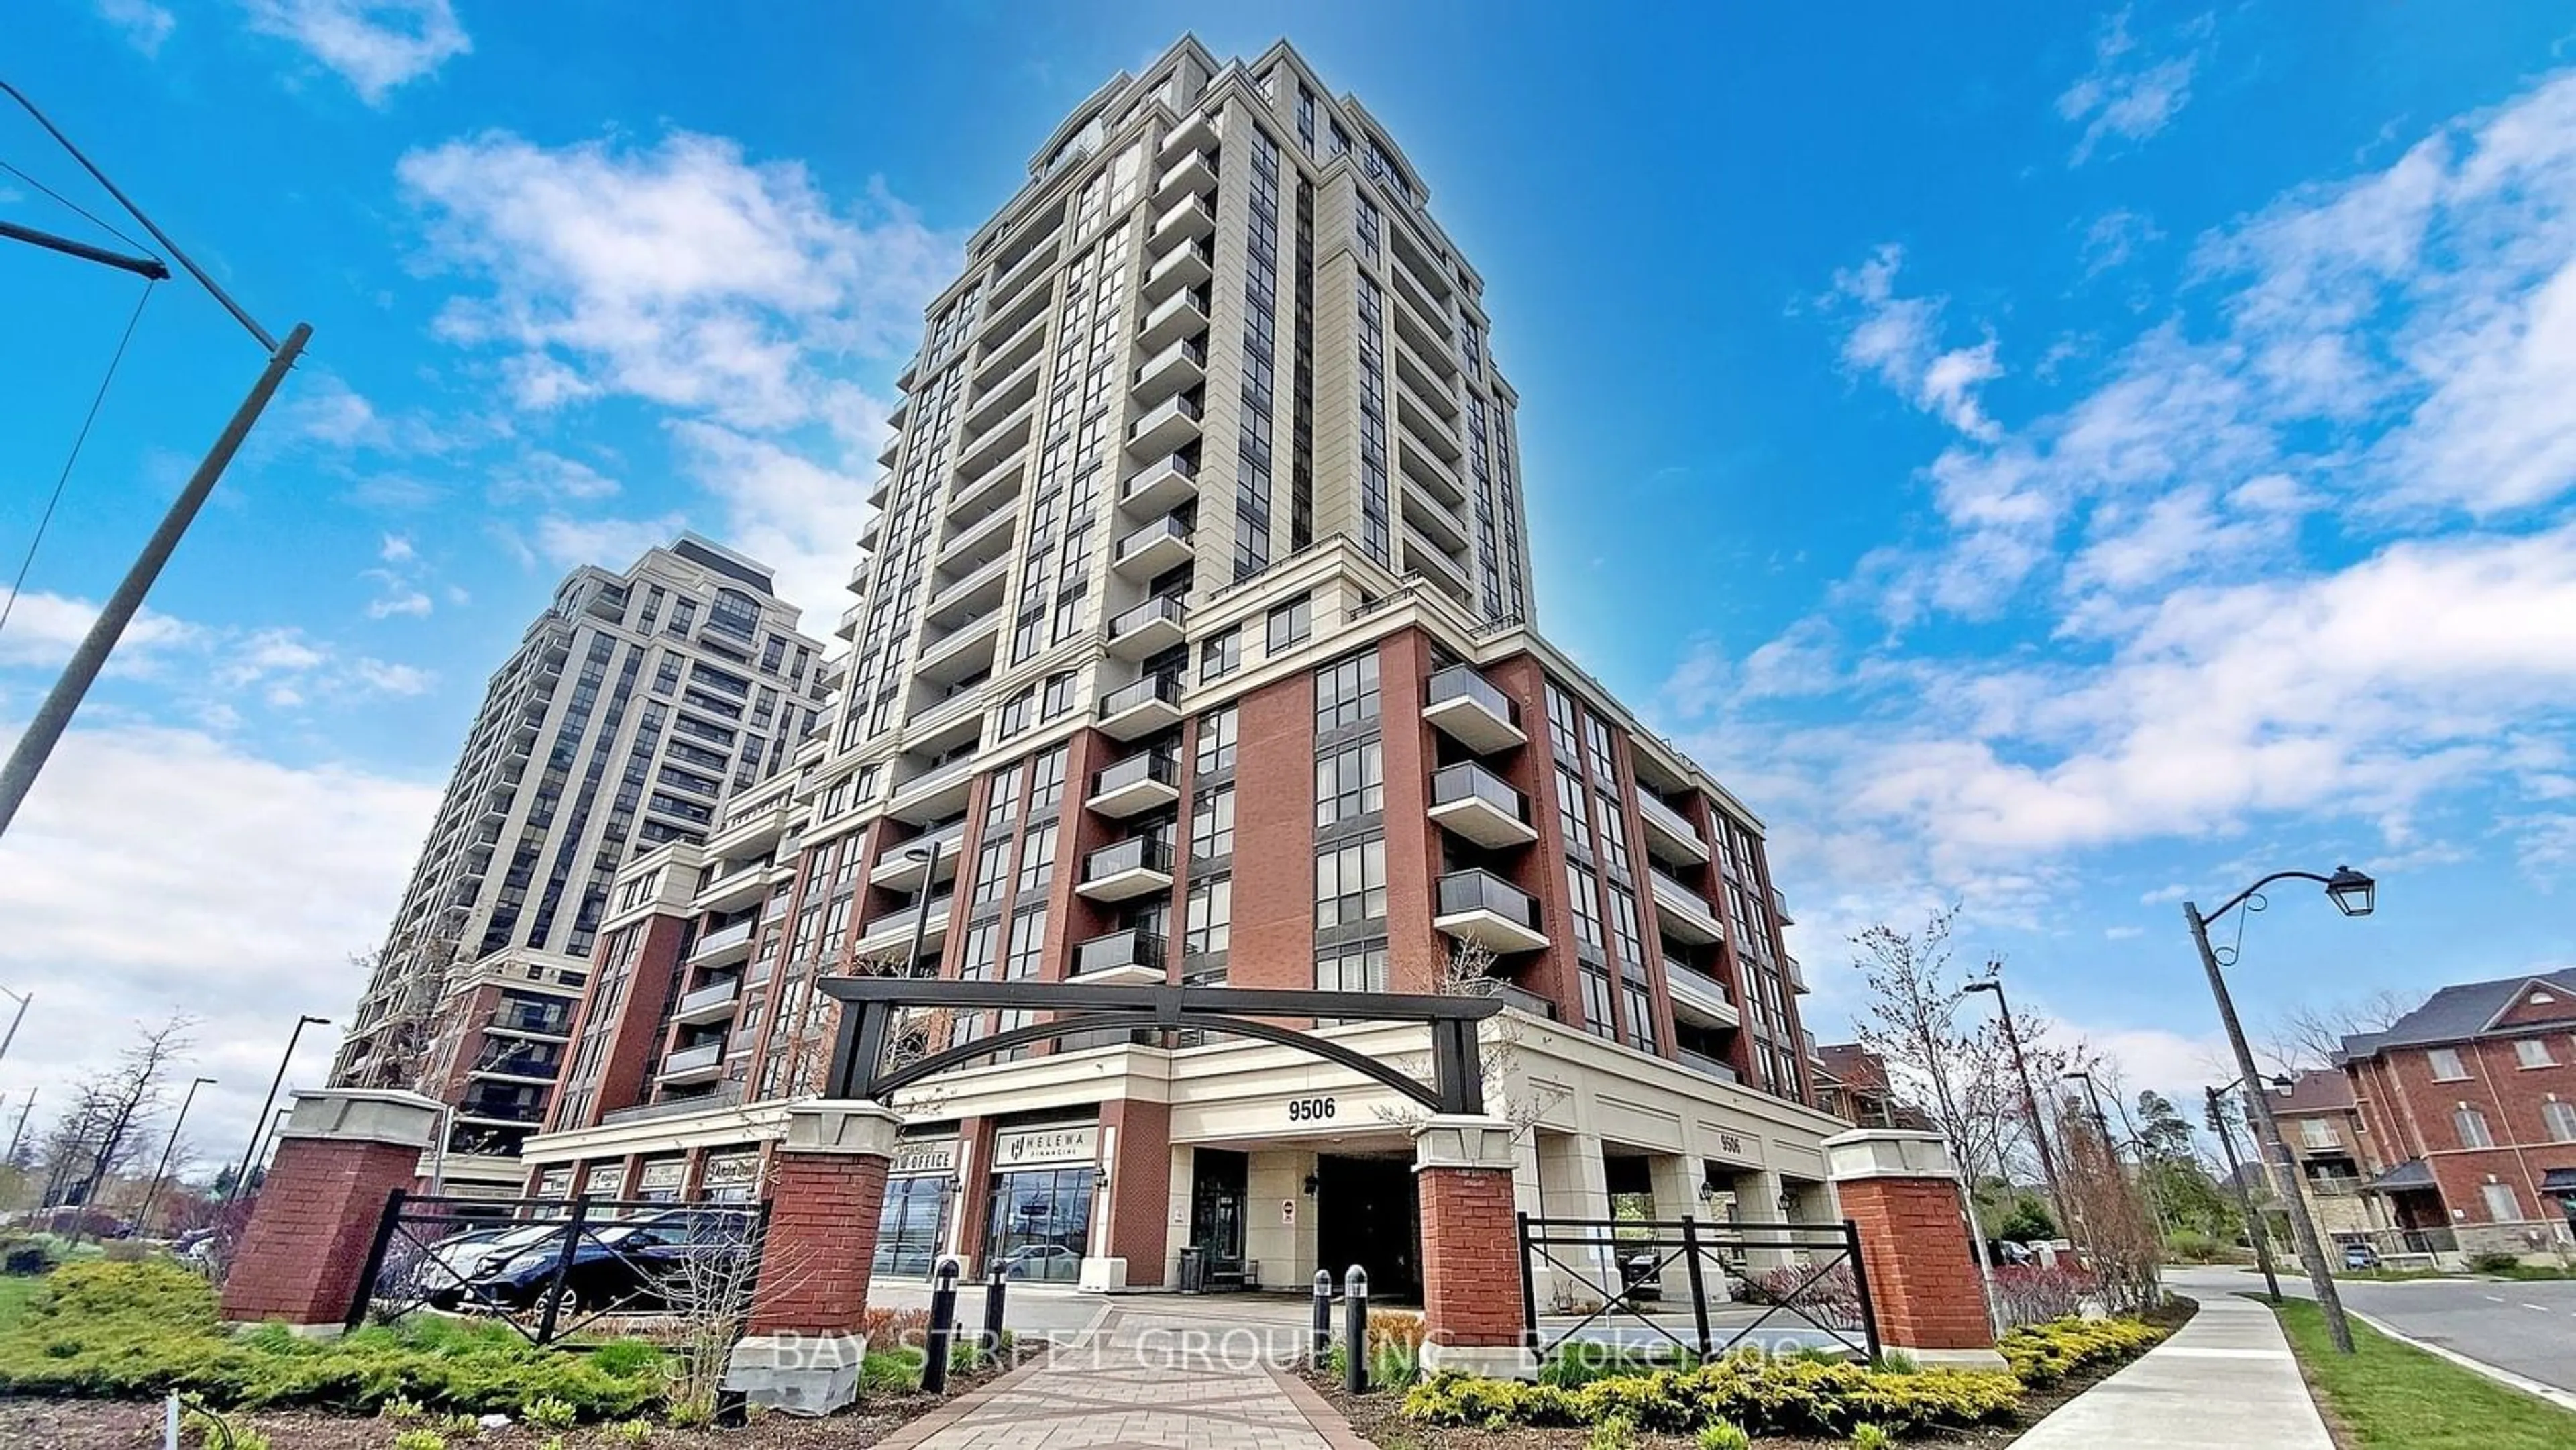 A pic from exterior of the house or condo for 9506 Markham Rd #620, Markham Ontario L6E 0S5